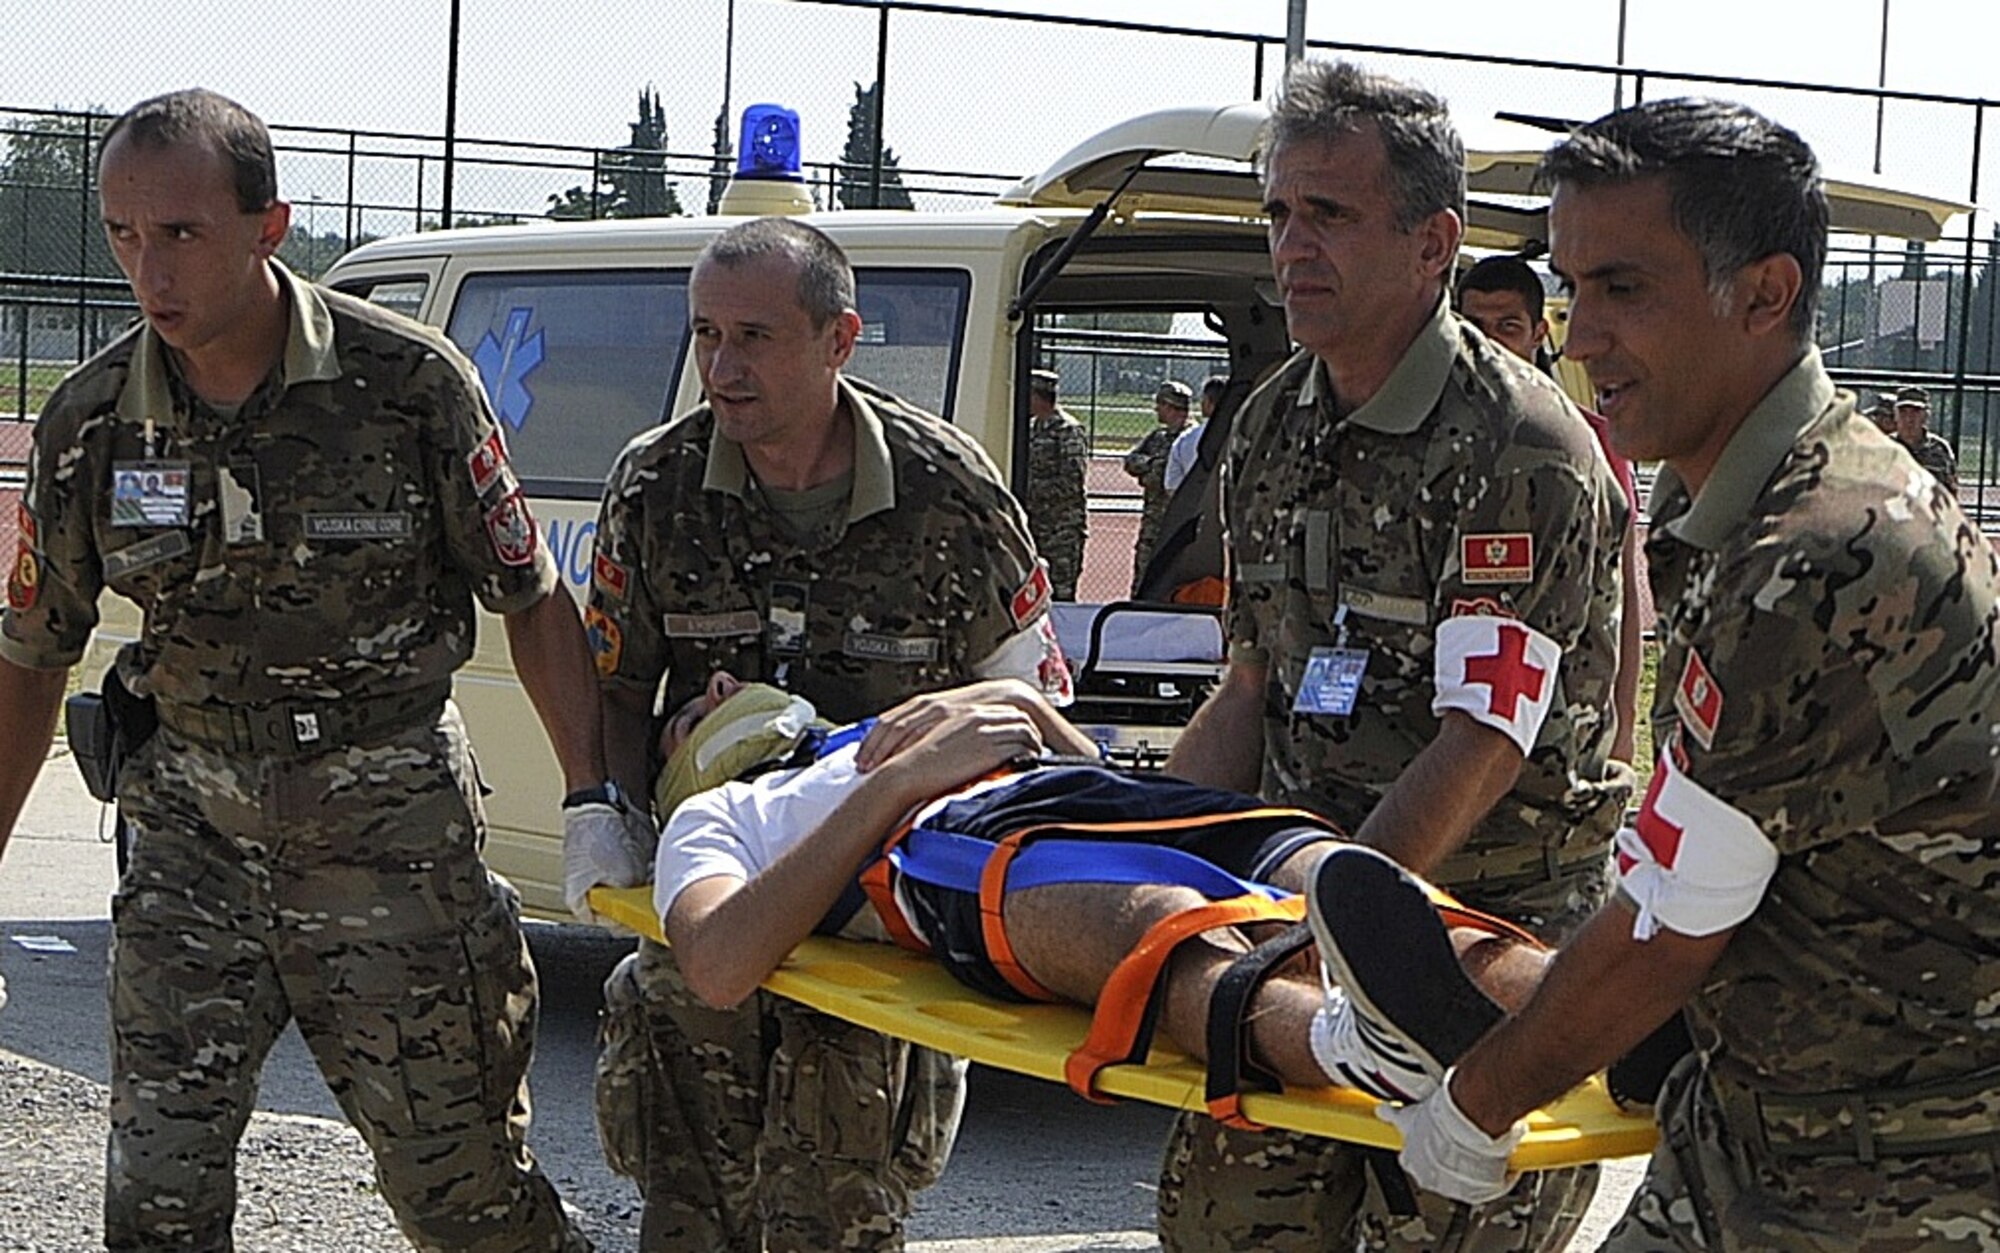 Montenegrin armed forces medics carry an acting victim on a stretcher to a medical treatment tent during a medical exercise as part of MEDCEUR 10, a medical training exercise in central and eastern Europe, at Danilovgrad Army Base, Montenegro, Sept. 17. Over 100 government ministers, flag officers and other distinguished visitors witnessed this exercise along with four other scenarios in which approximately than 250 servicemembers from ten nations were participating in to receive realistic training to be more prepared for real world situations. For more information, go to www.usafe.af.mil/medceur.asp and www.odbrana.gov.me. (U.S. Air Force photo/Airman 1st Class Tiffany M. Deuel)